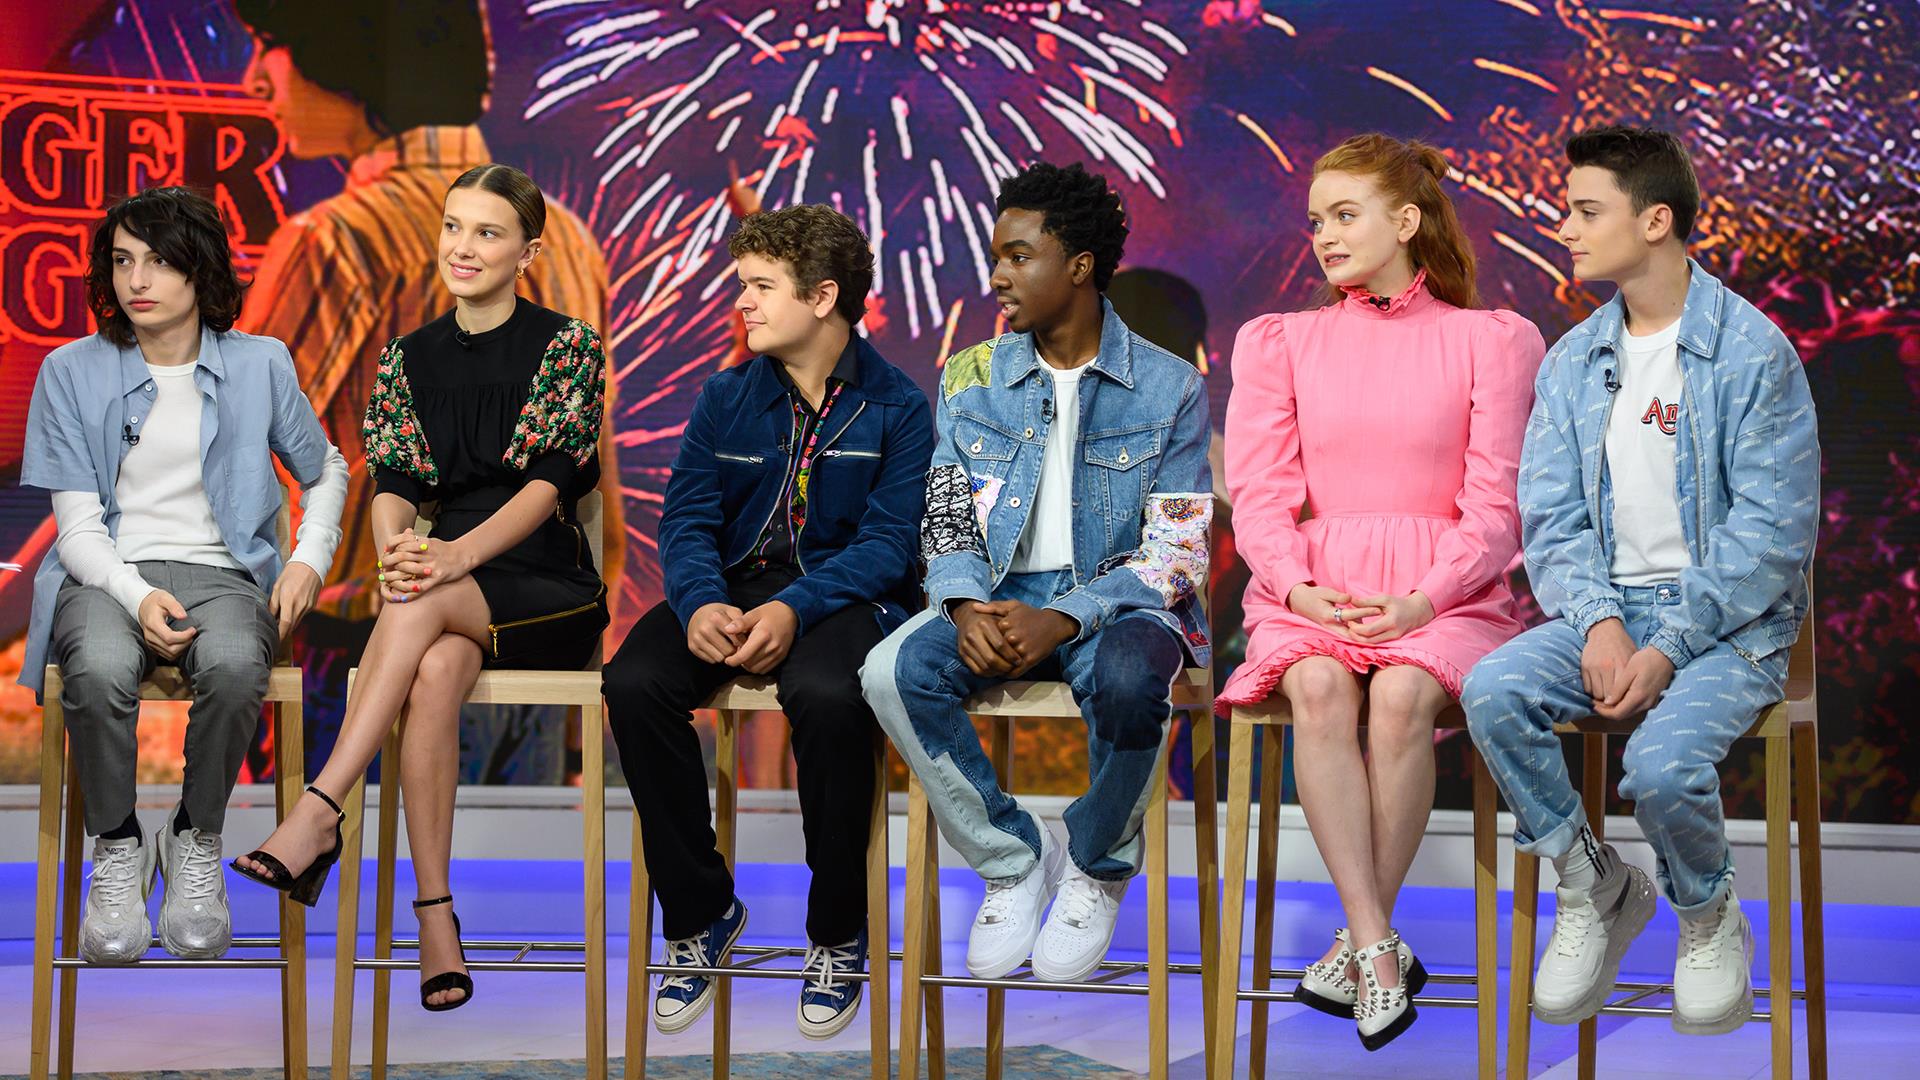 Stranger Things Stars Explain the Show's Approach to Will's Sexuality